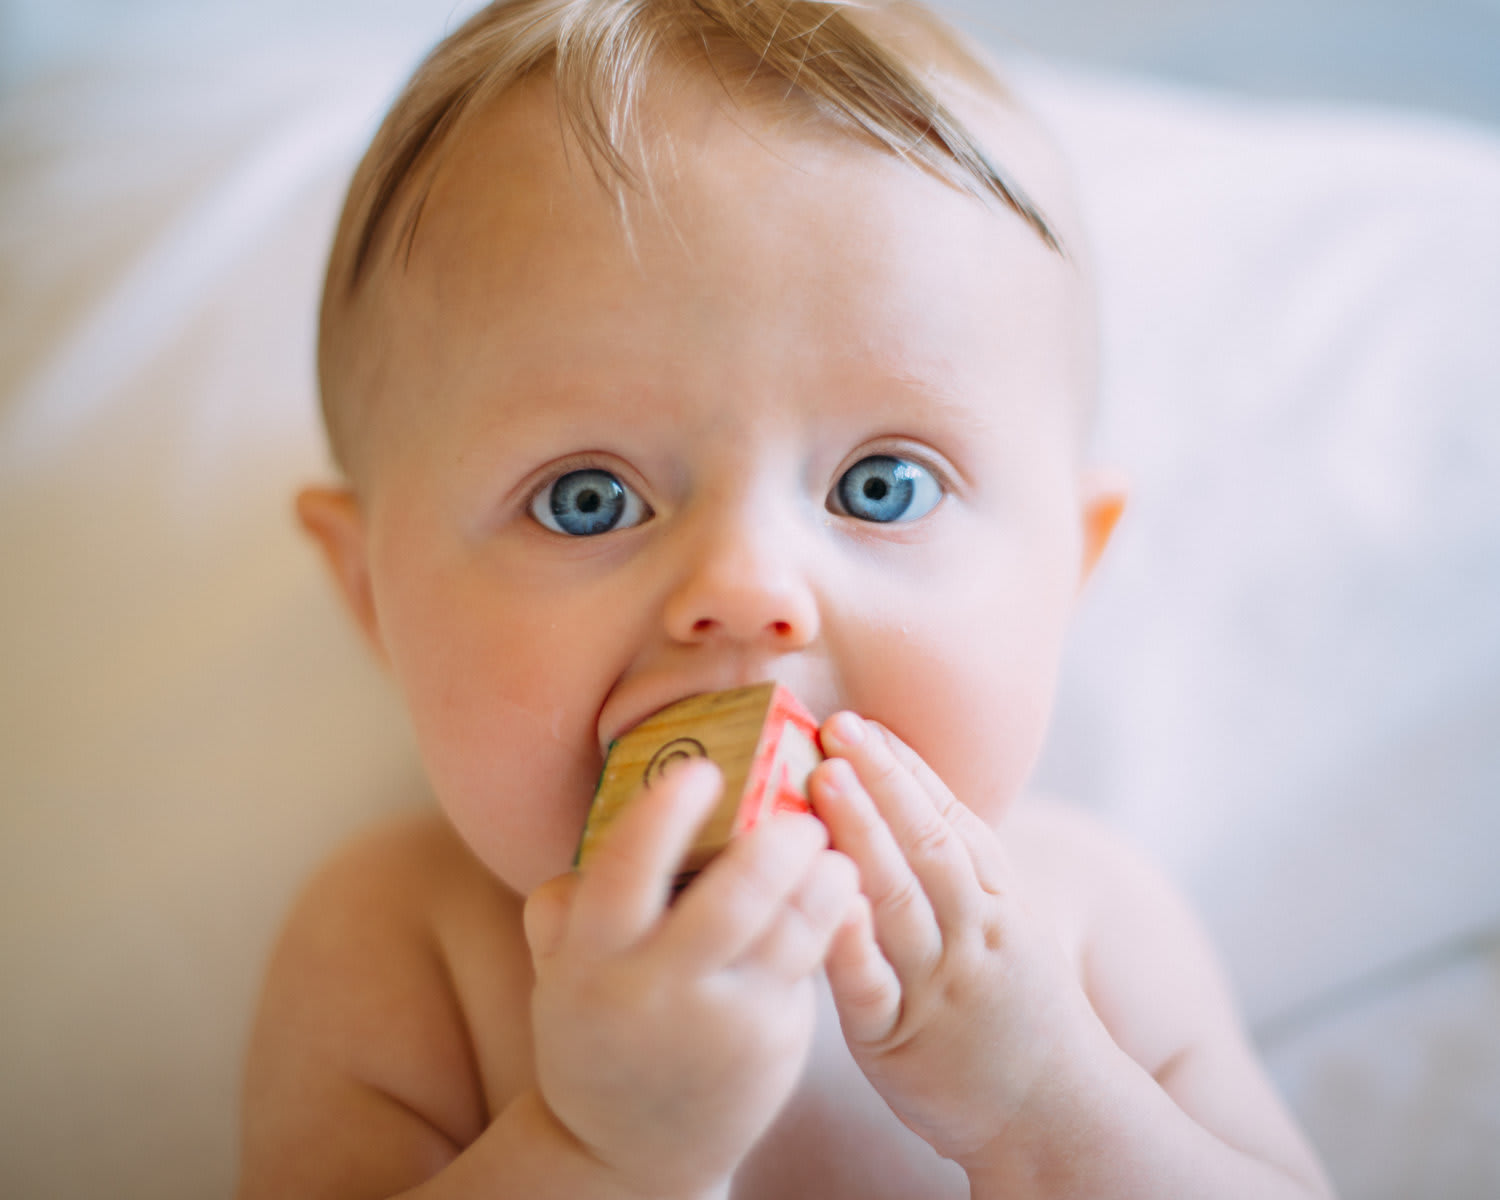 How Old Was Your Baby When You Started Baby Led Weaning? — Lorena & Lennox